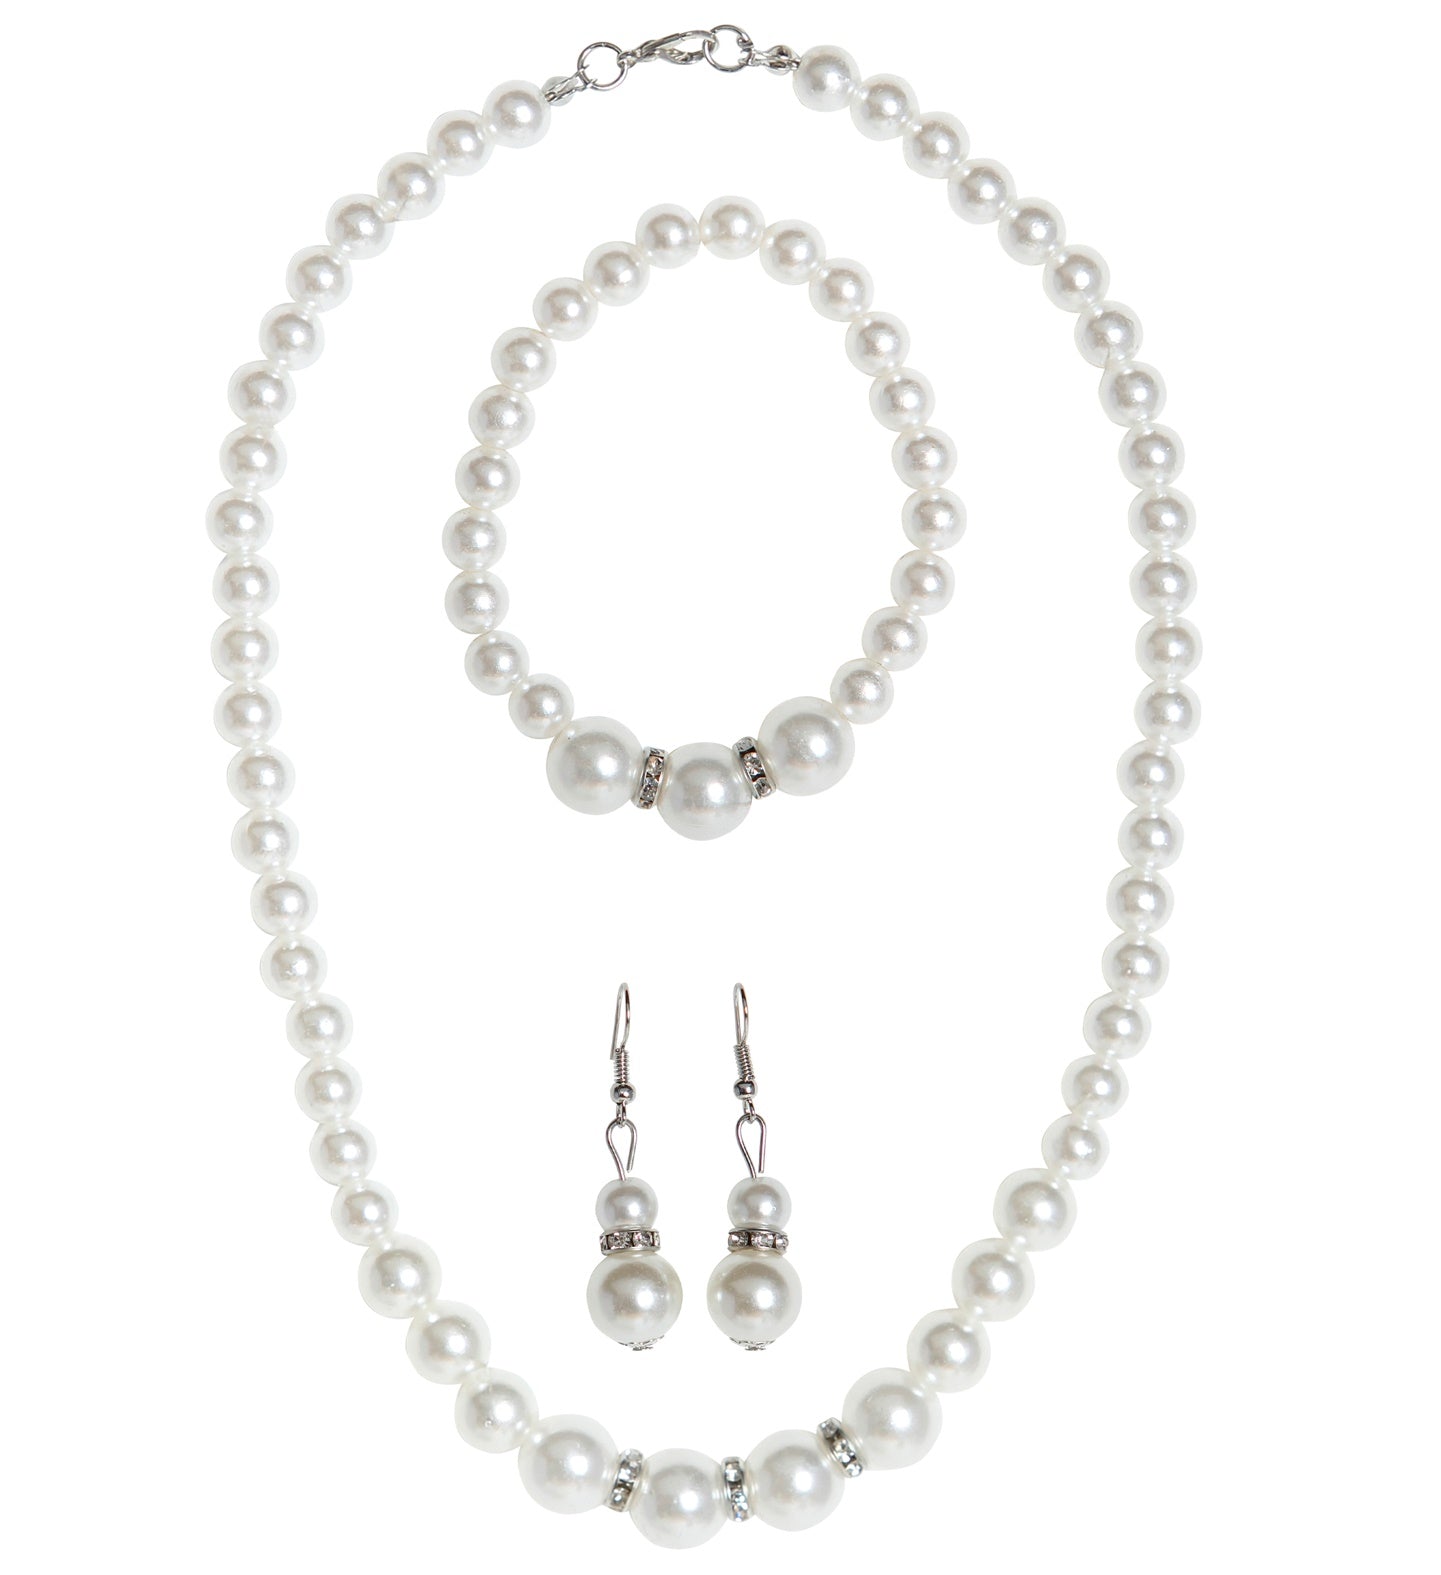 Strass Pearl Necklace, Earrings and Bracelet